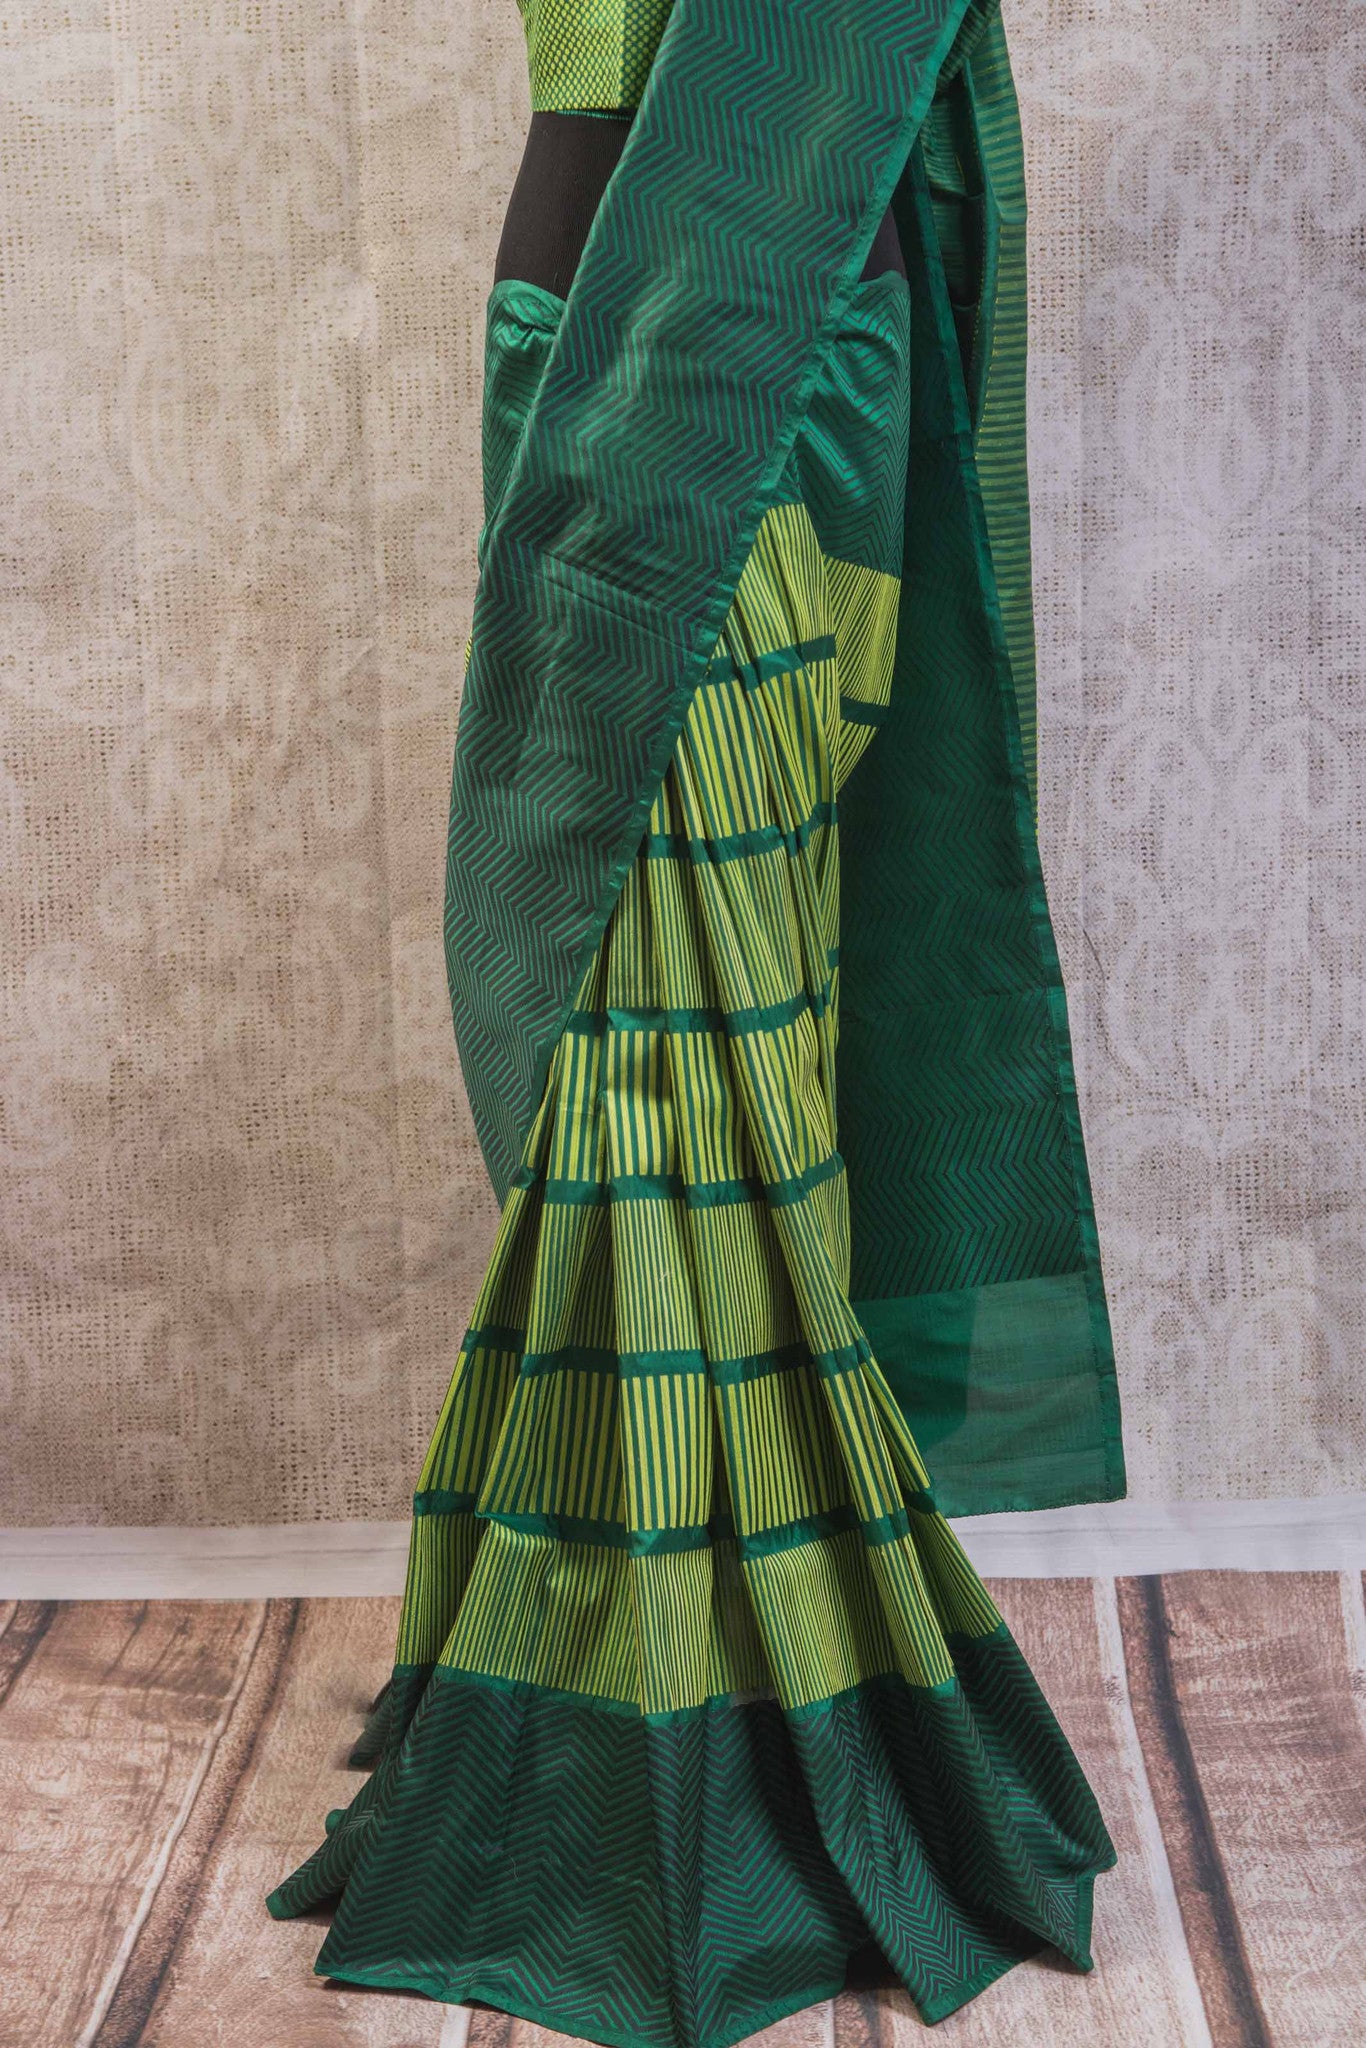 90b256 Multi green Banarasi silk saree with zig-zag stripes & satin black pallu. Buy this simple sari online at our Indian clothing store in USA, Pure Elegance. This one is perfect for pujas, get-togethers and functions!